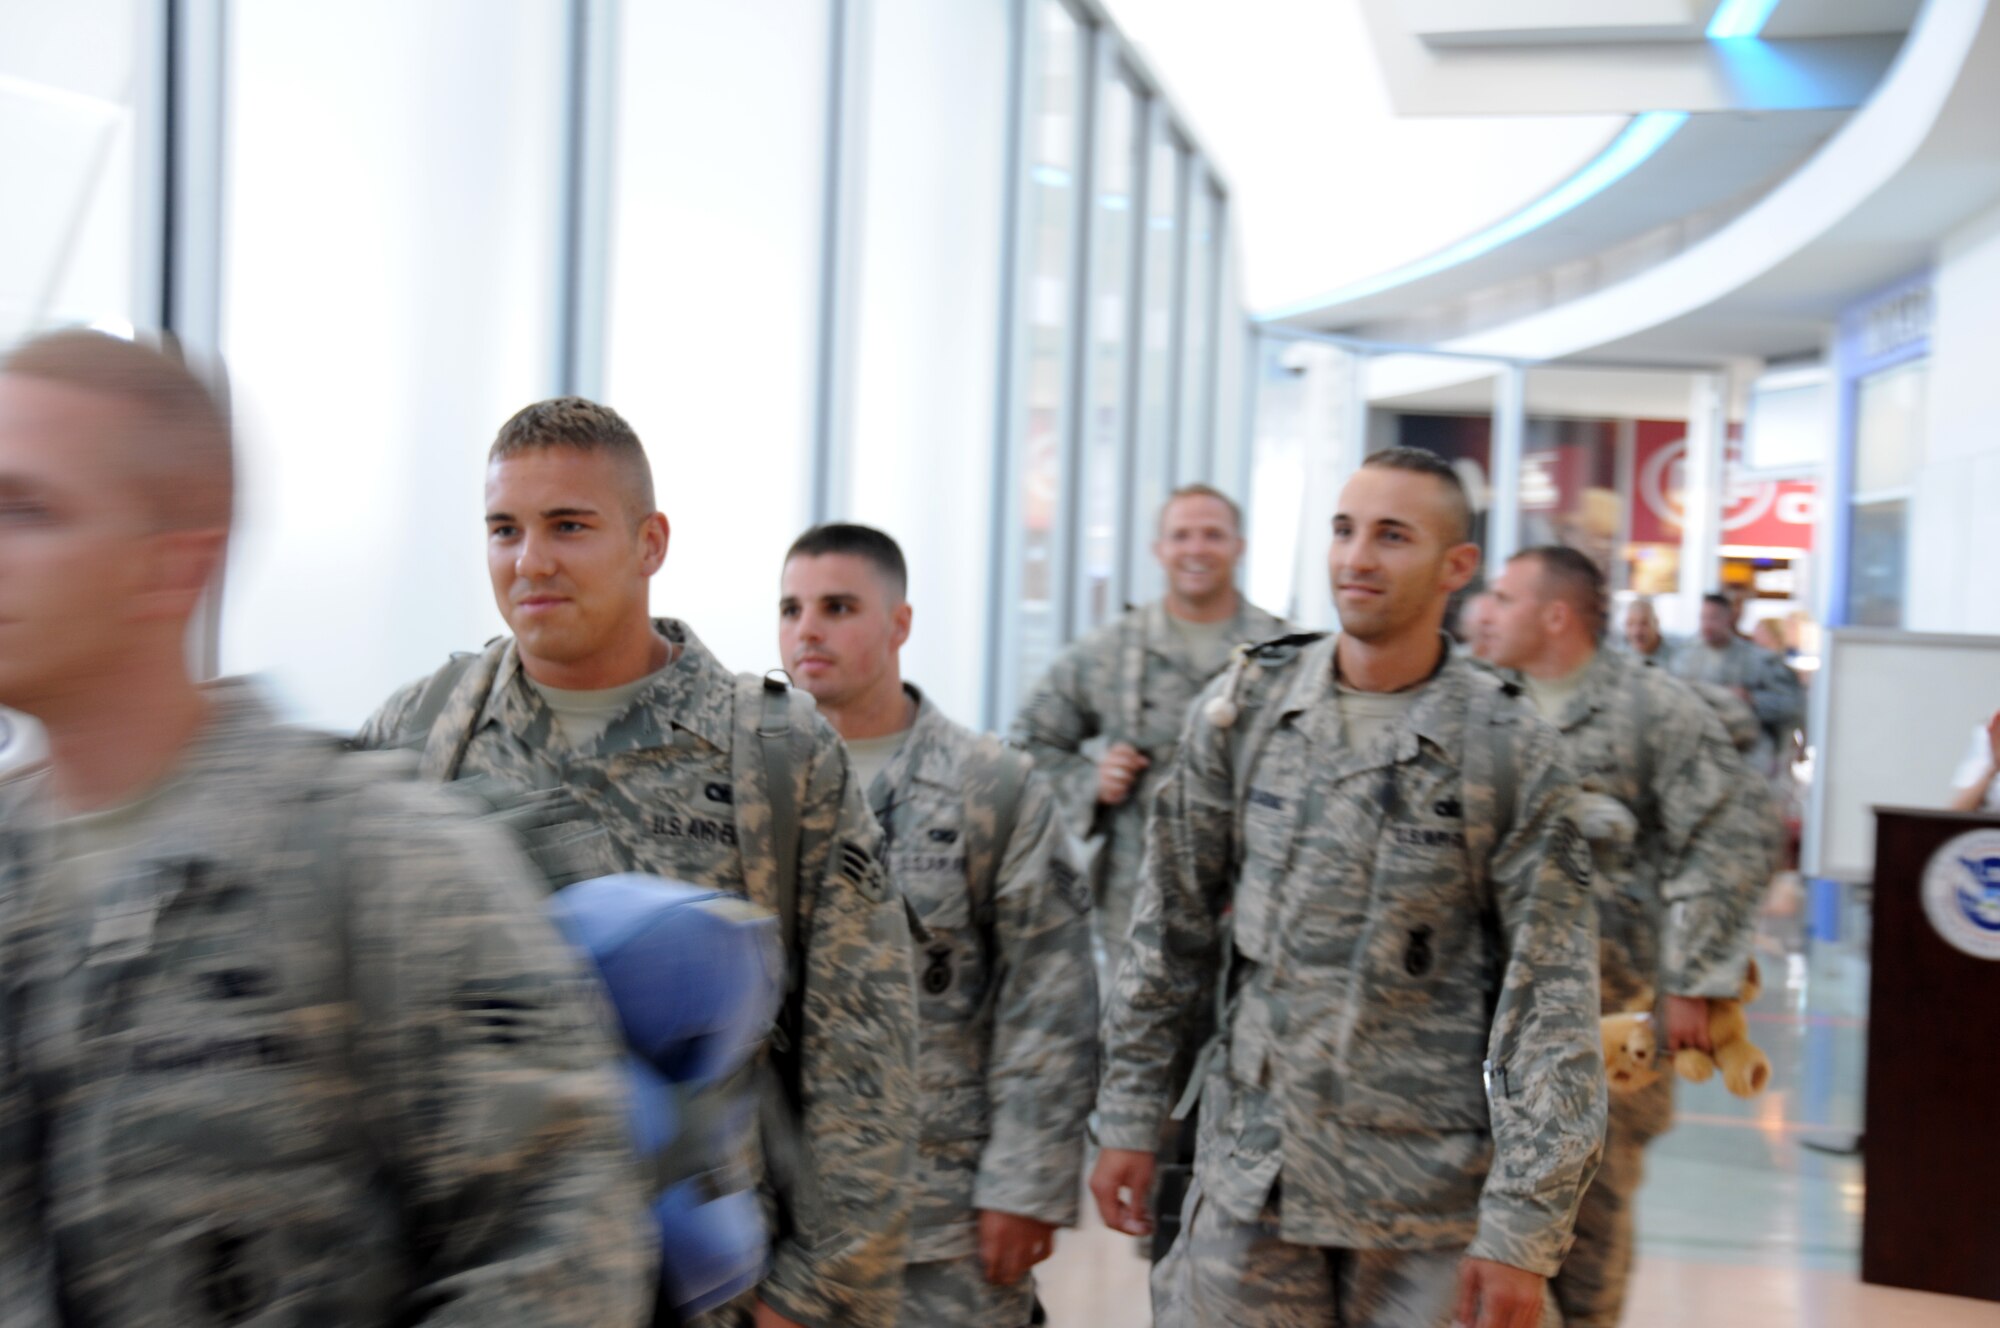 Security forces new mission, to reunite with their families. (U.S. Air Force photo/Senior Airman Peter Dean)